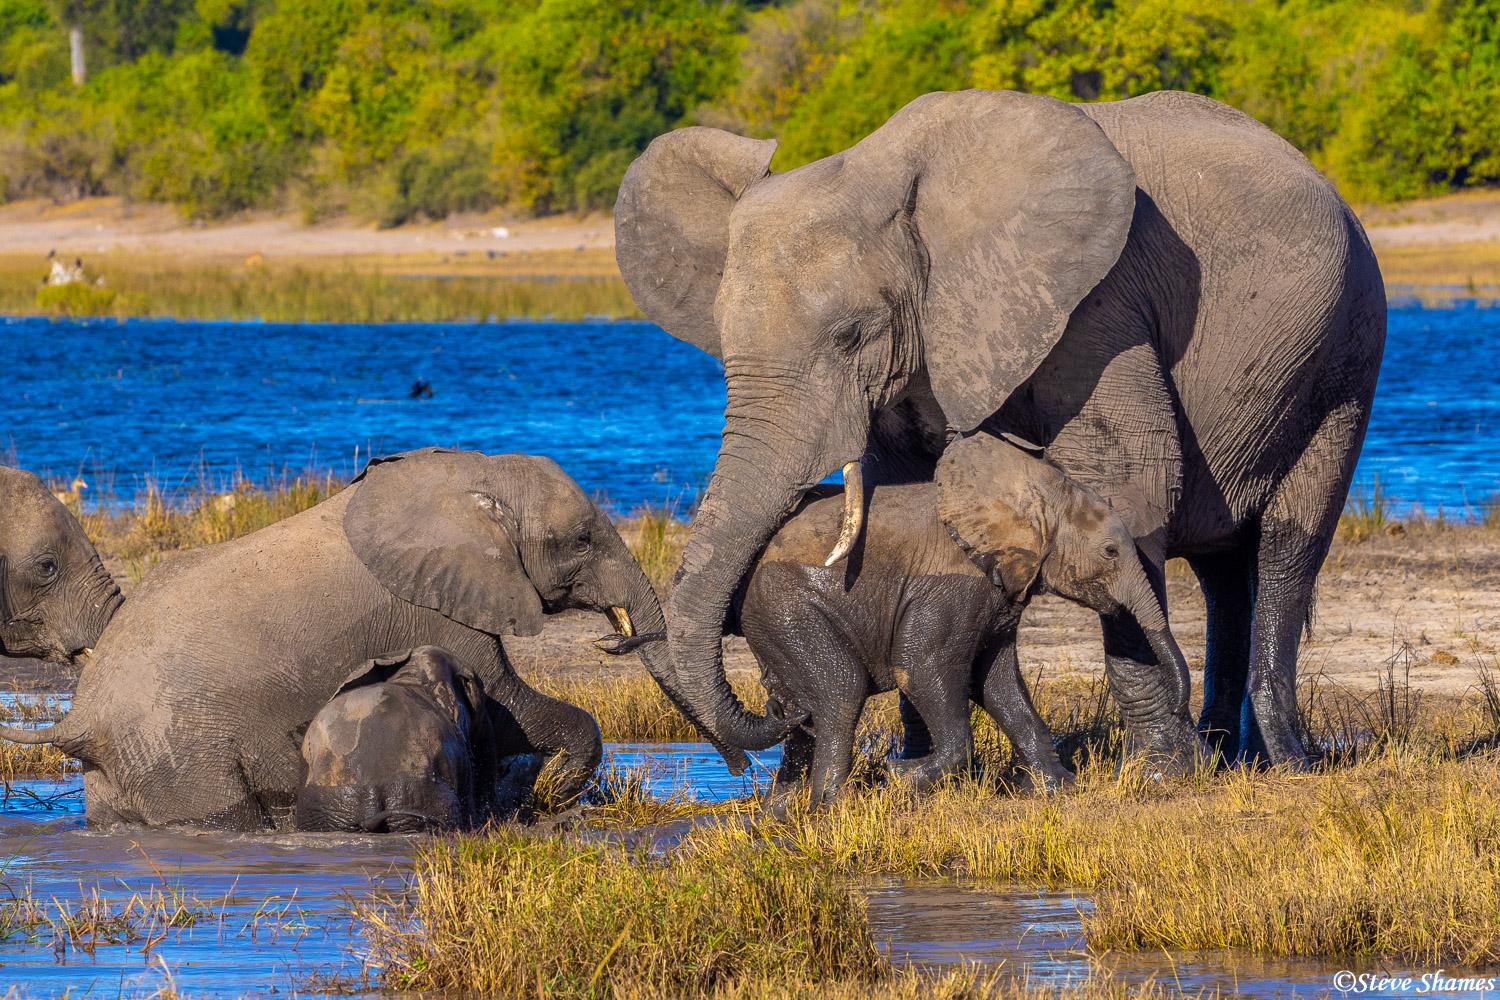 A tender moment at Chobe National Park, with the mother elephant protecting her calf.